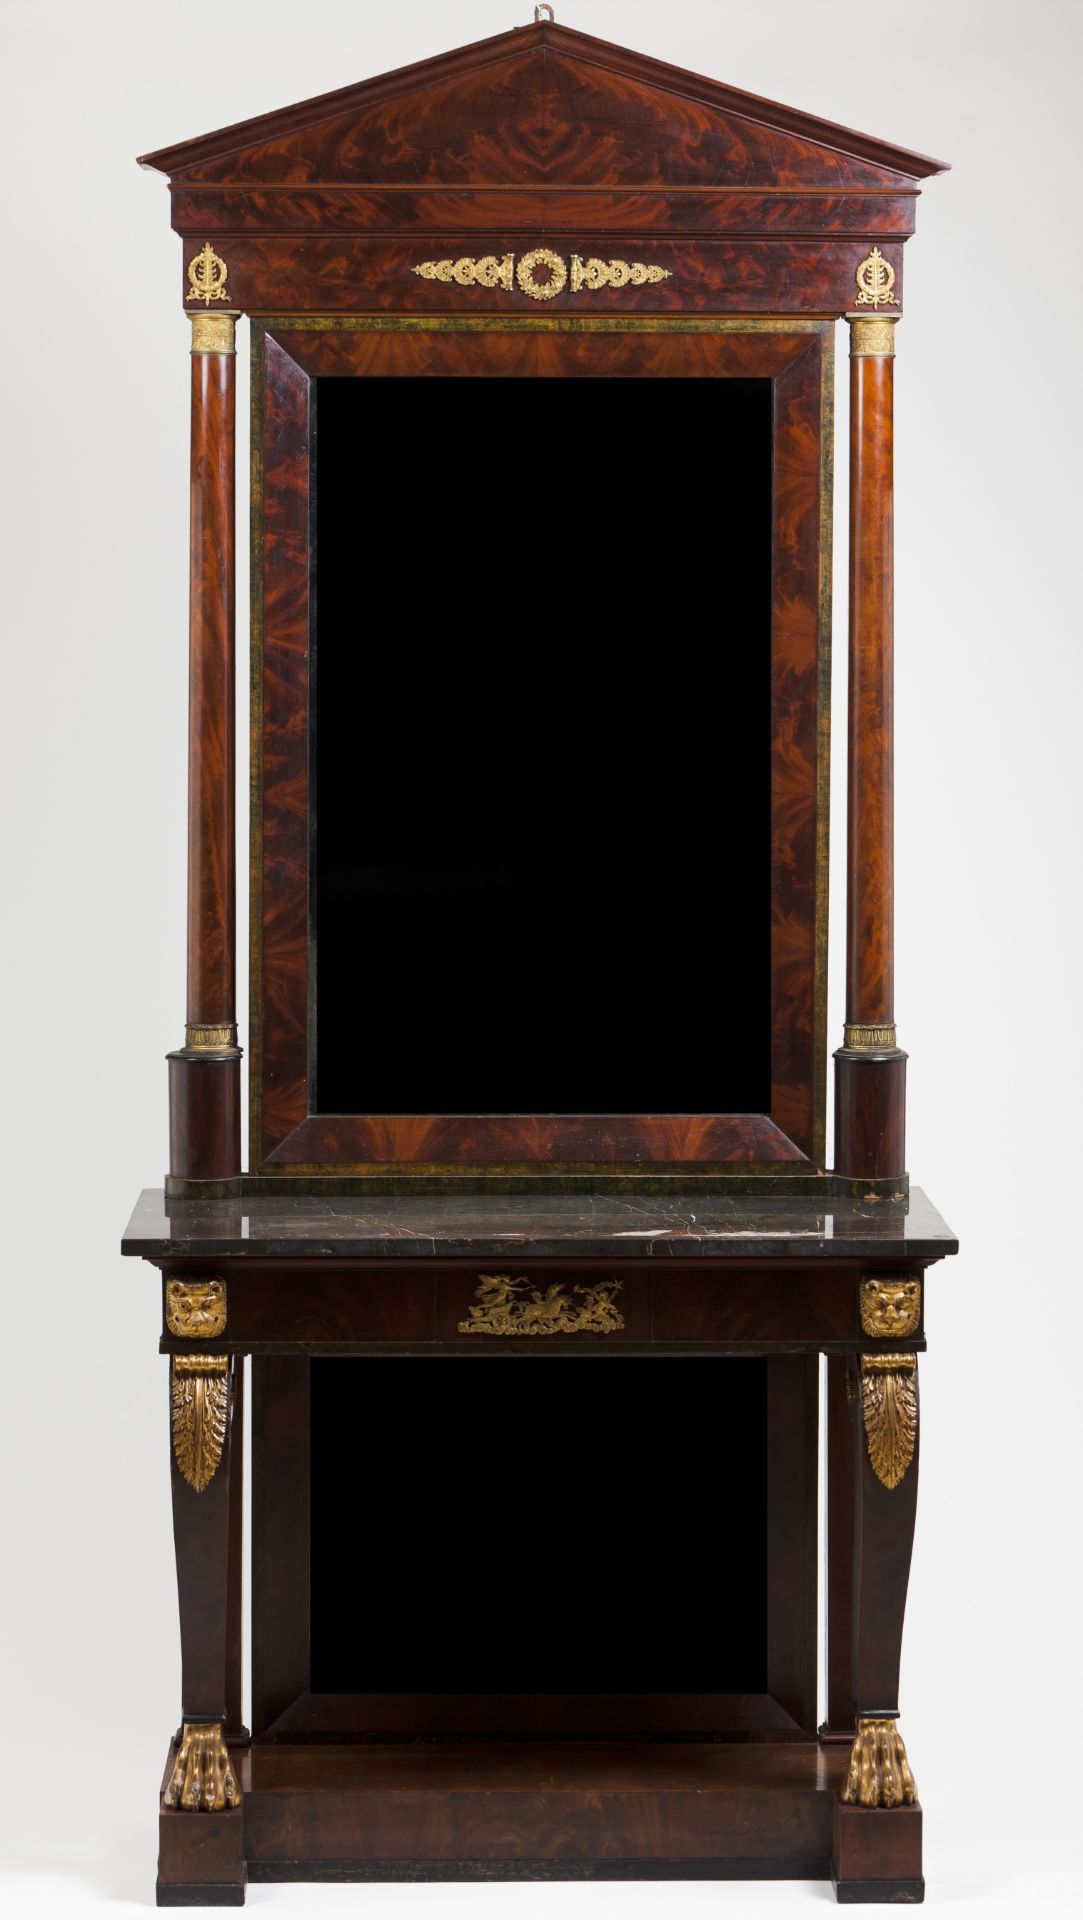 An Empire pier table and mirrorMahogany and burr mahogany veneered timberCarved and gilt